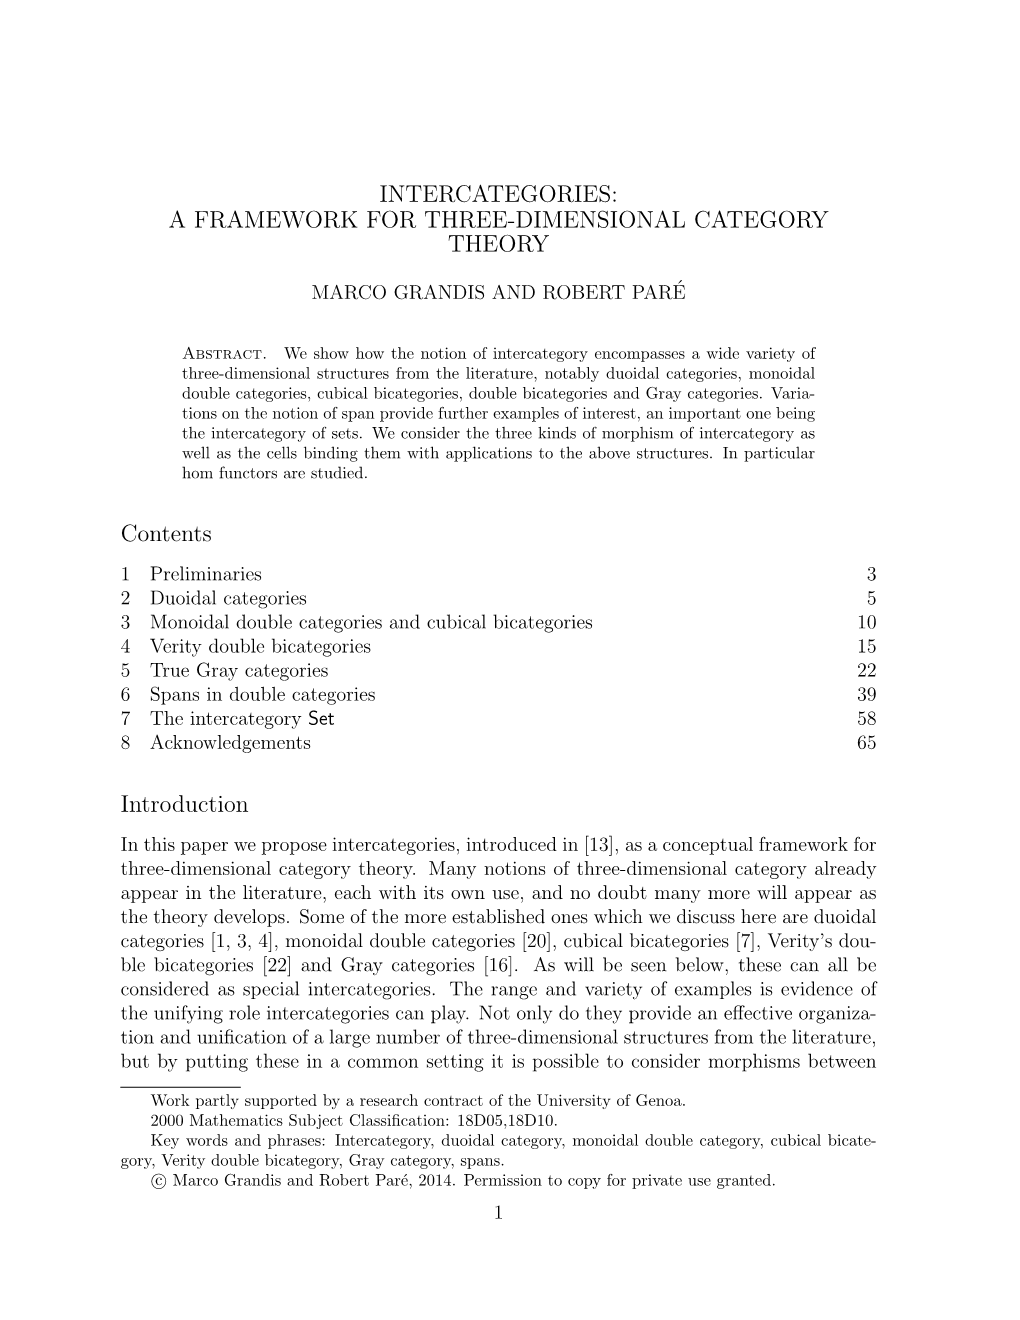 Intercategories: a Framework for Three-Dimensional Category Theory